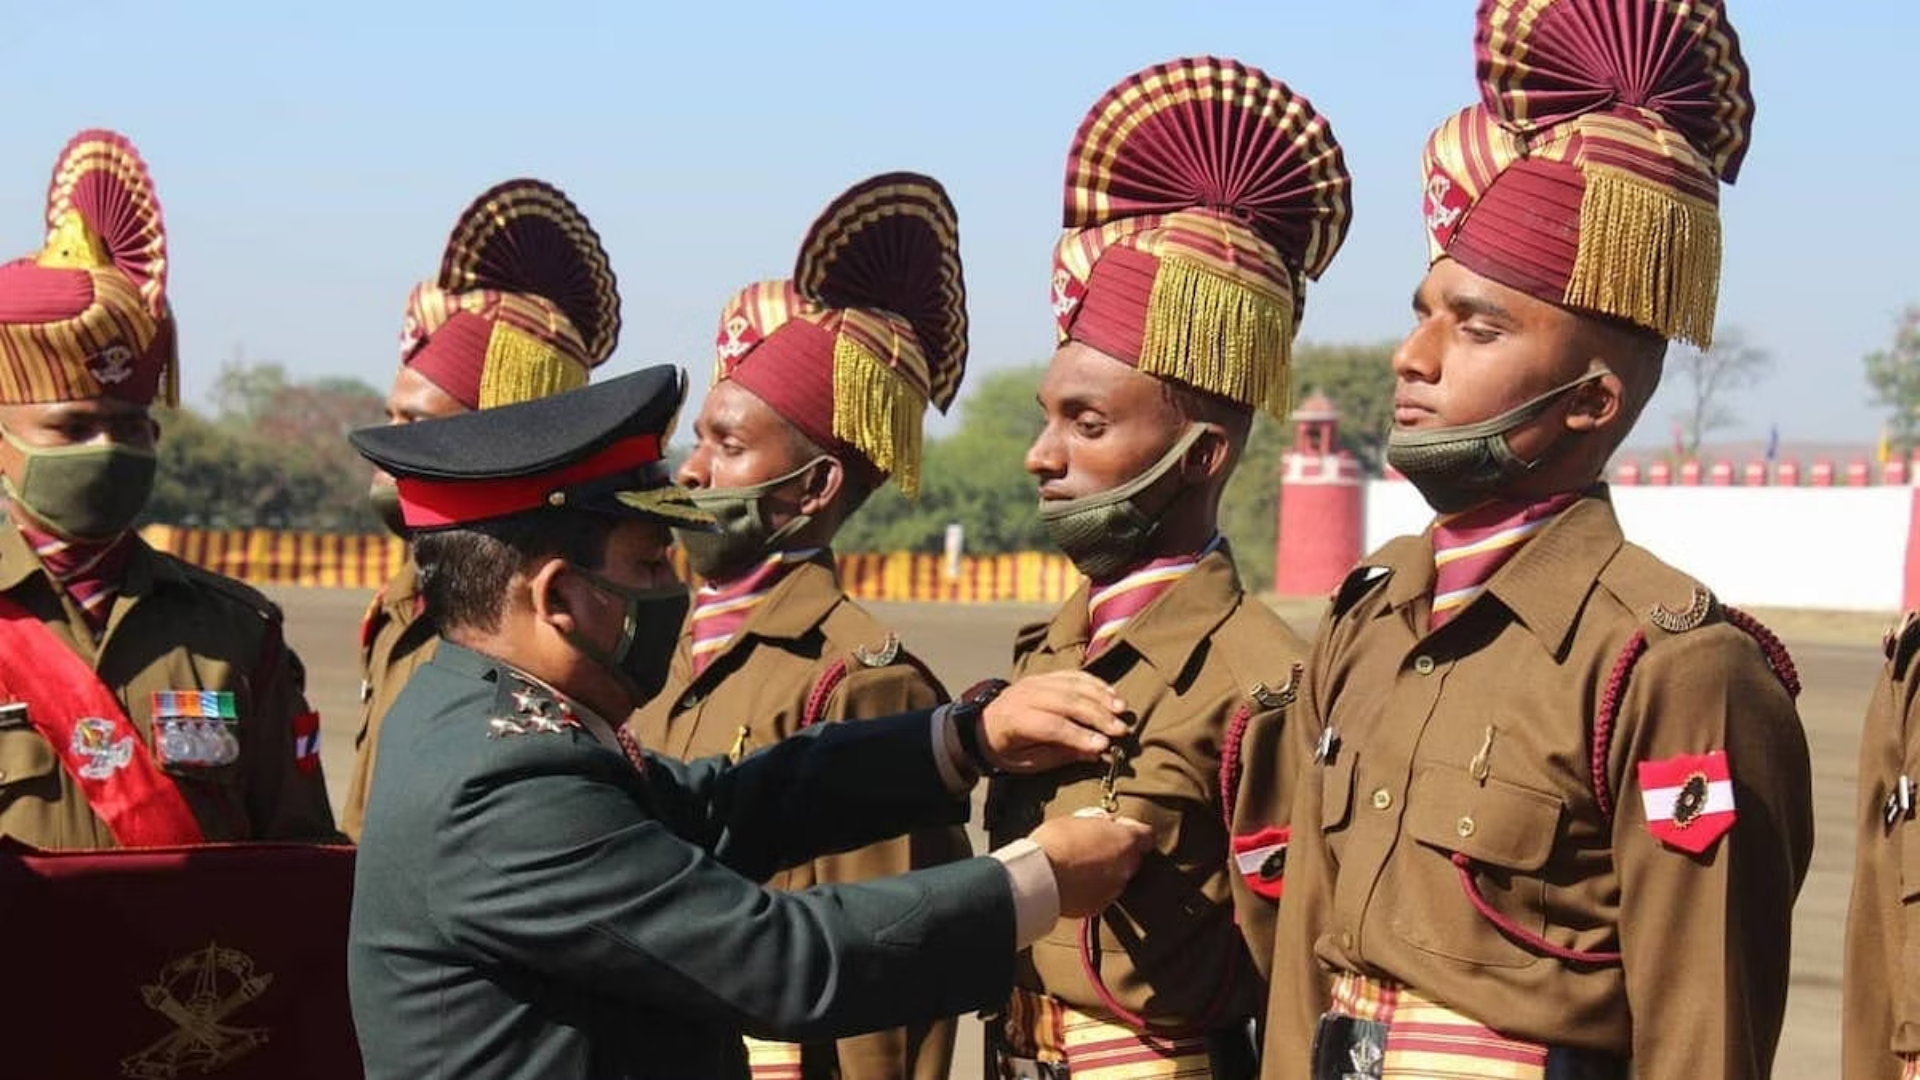 How Are PM Modi's Agnipath Reforms Reshaping India's Military?